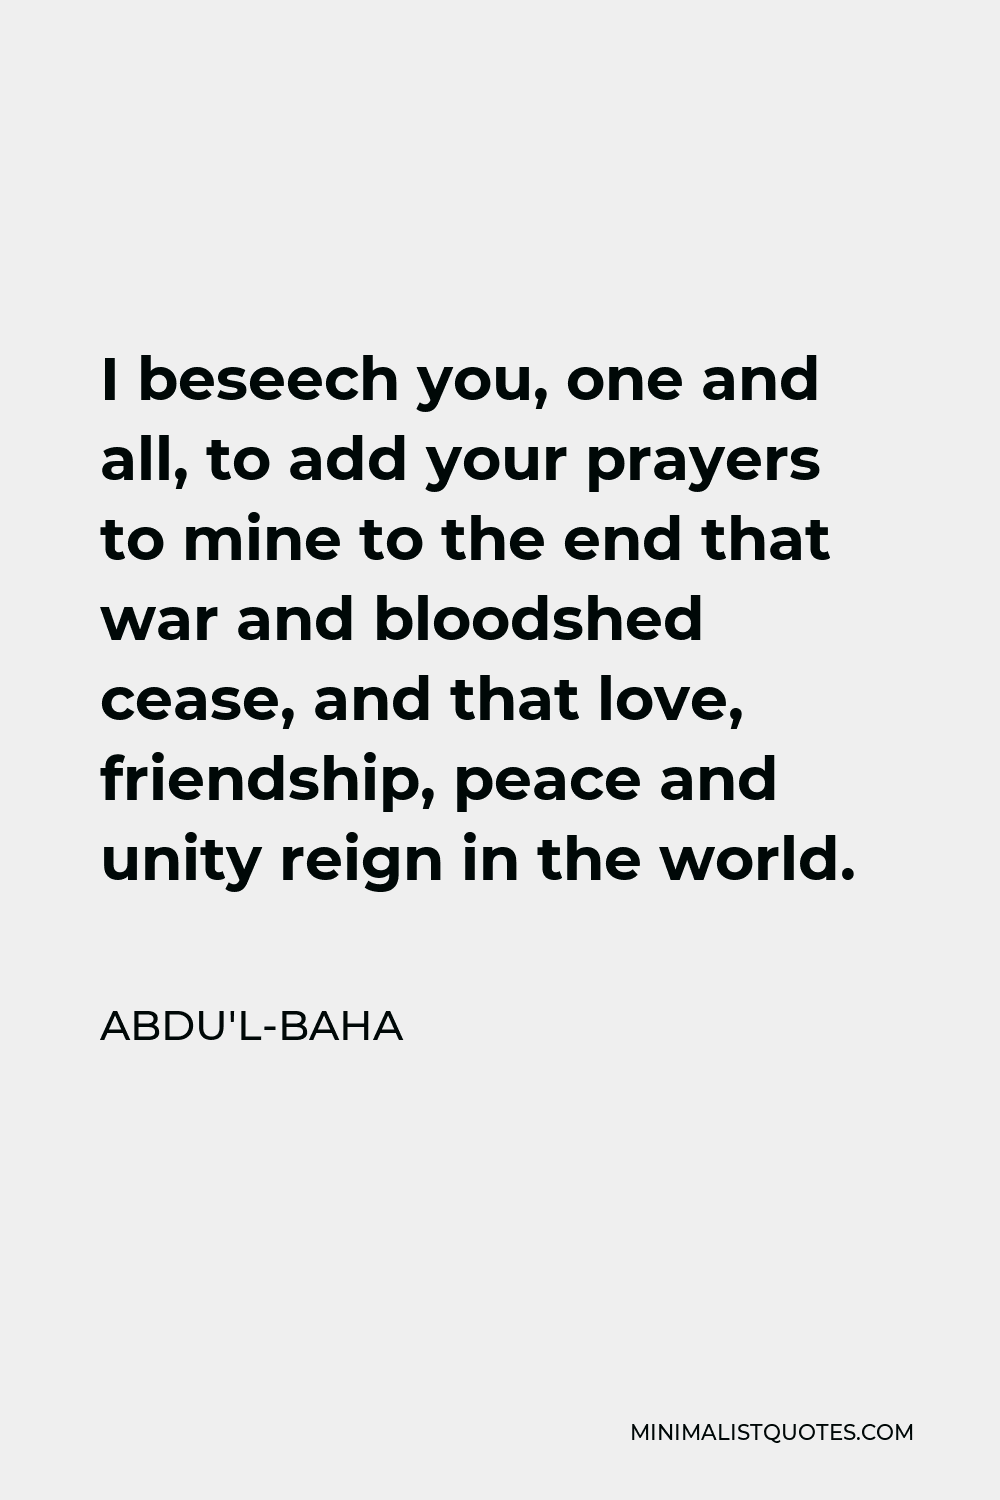 Abdu'l-Baha Quote - I beseech you, one and all, to add your prayers to mine to the end that war and bloodshed cease, and that love, friendship, peace and unity reign in the world.